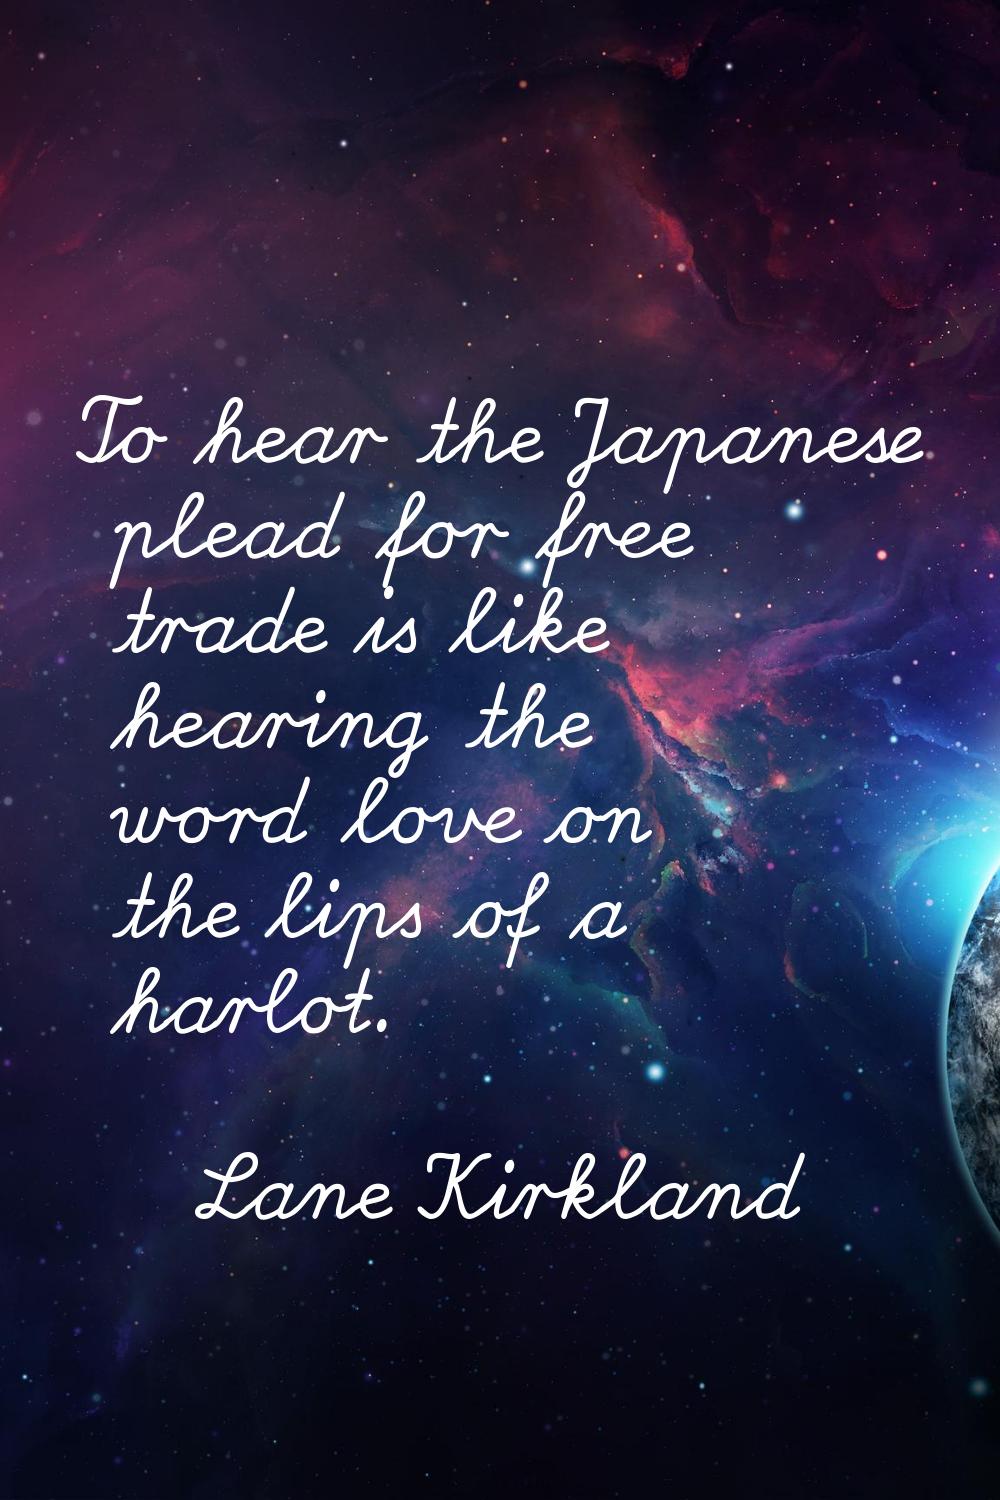 To hear the Japanese plead for free trade is like hearing the word love on the lips of a harlot.